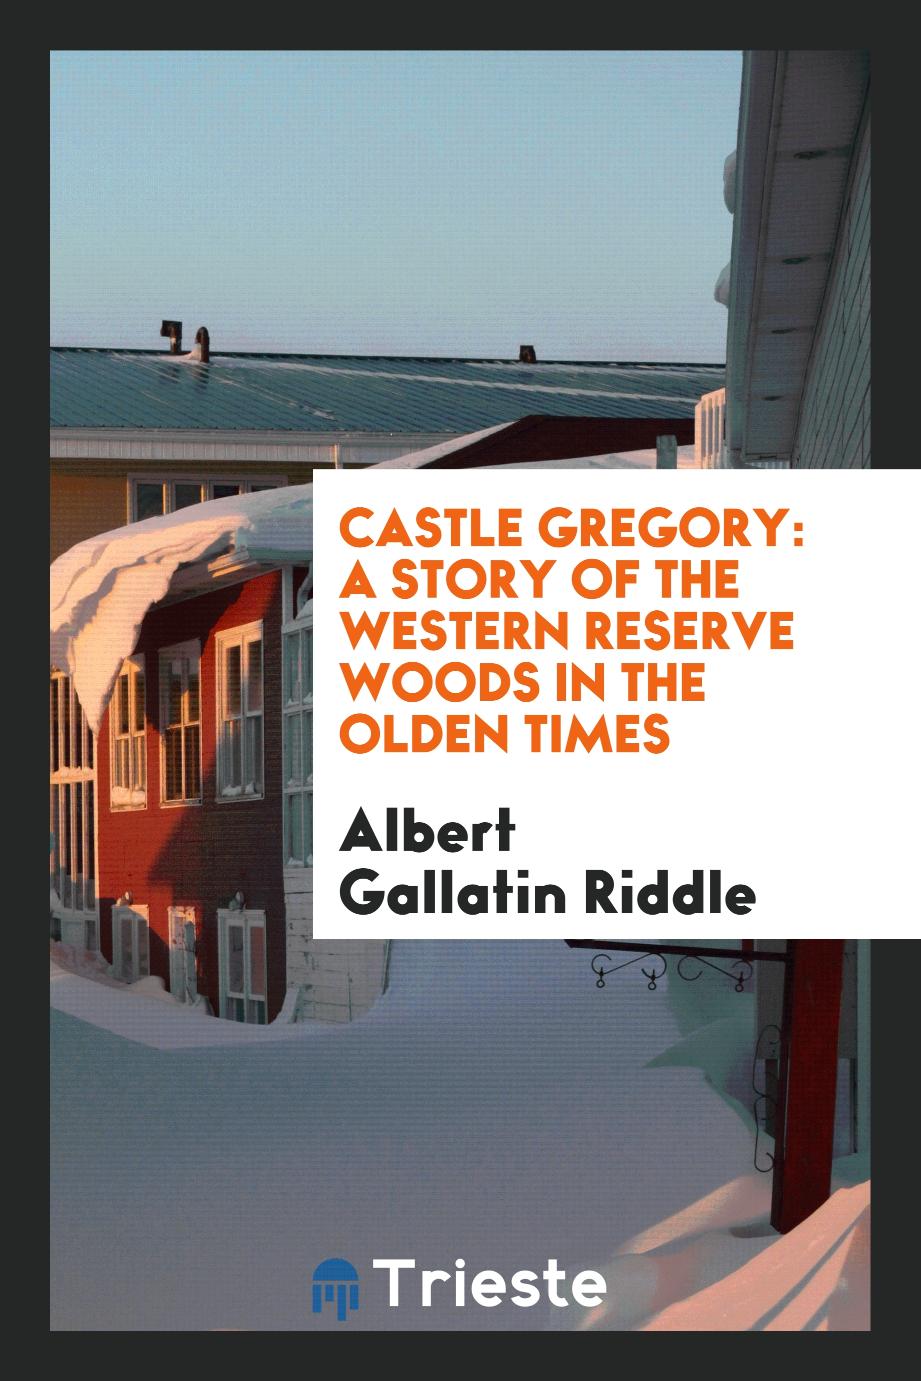 Castle Gregory: A Story of the Western Reserve Woods in the Olden Times